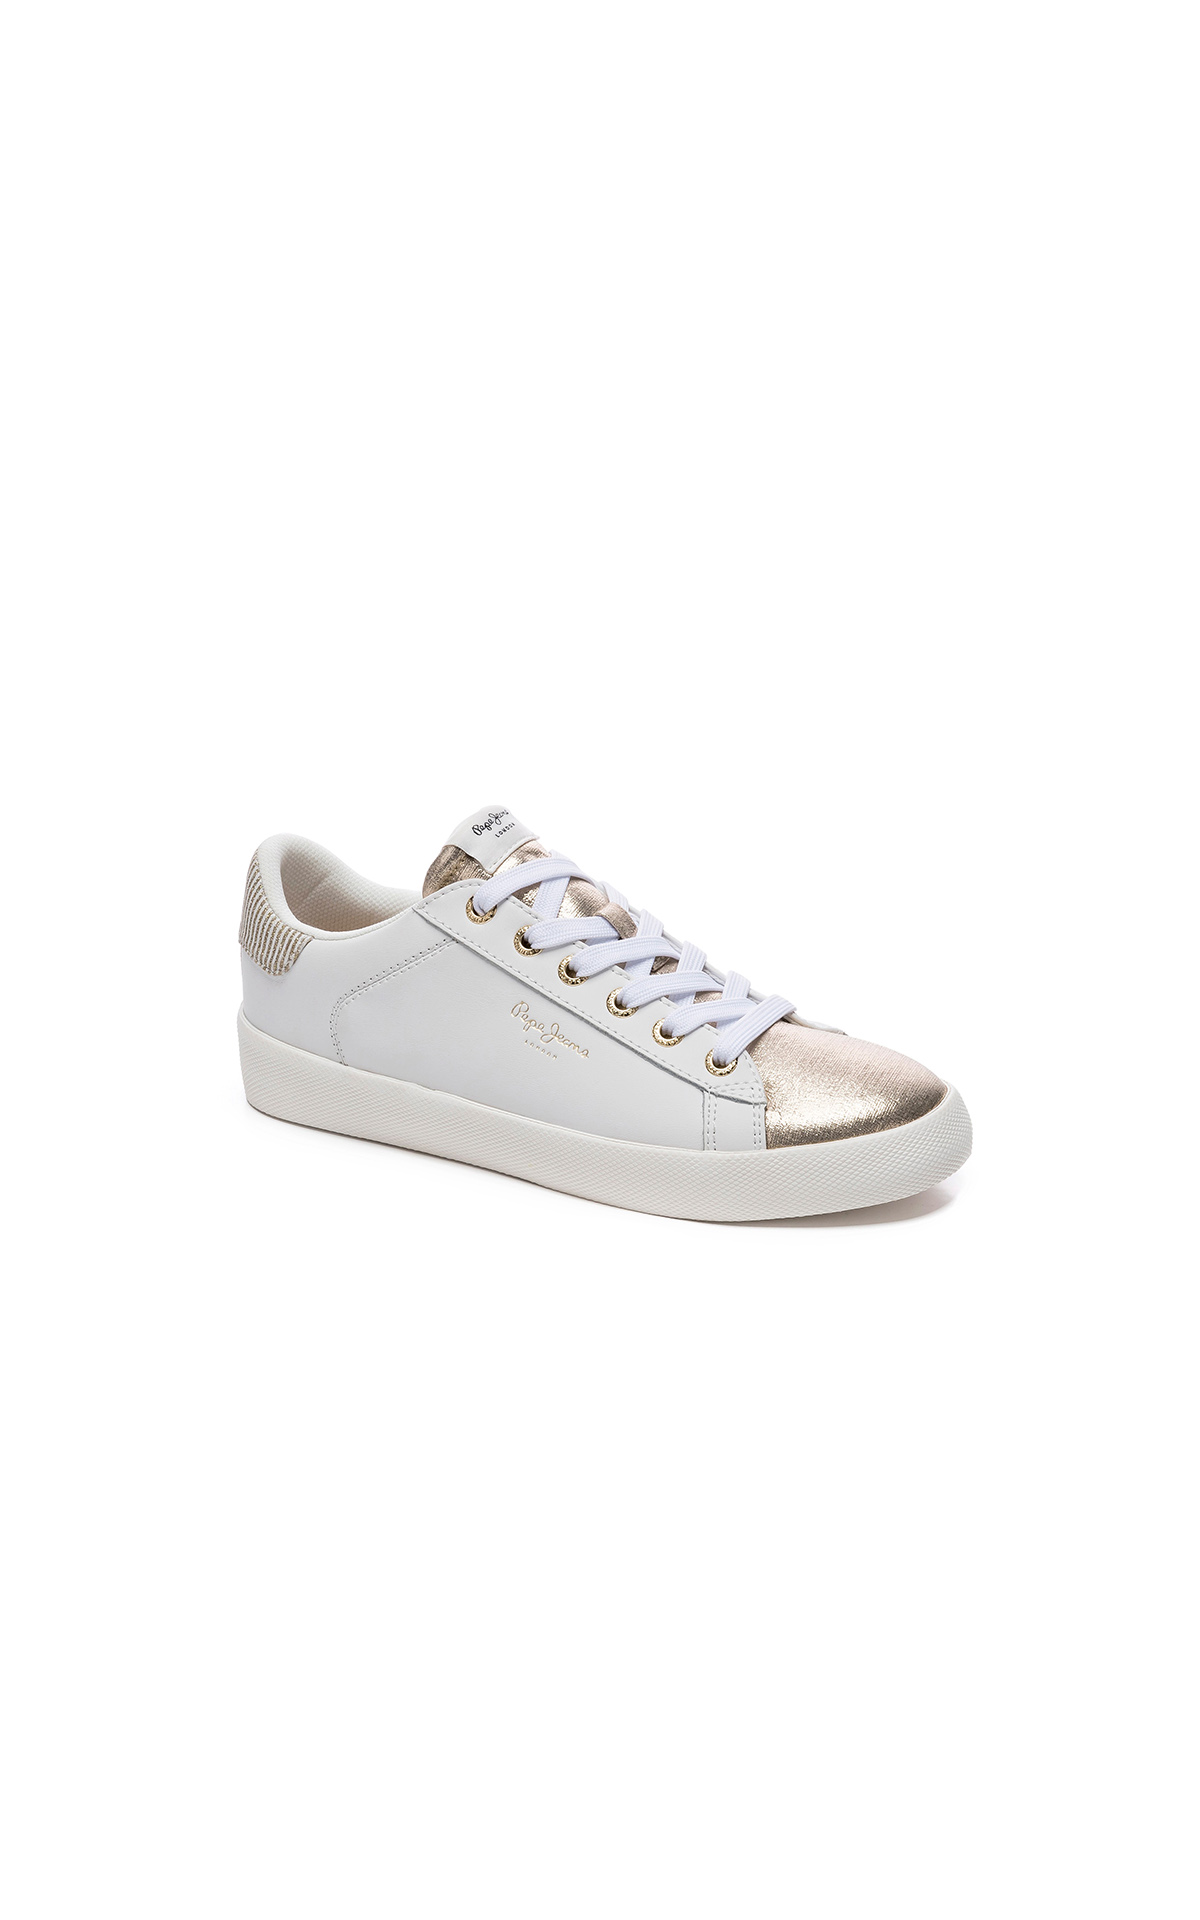 White sneaker with gold tip Pepe jeans